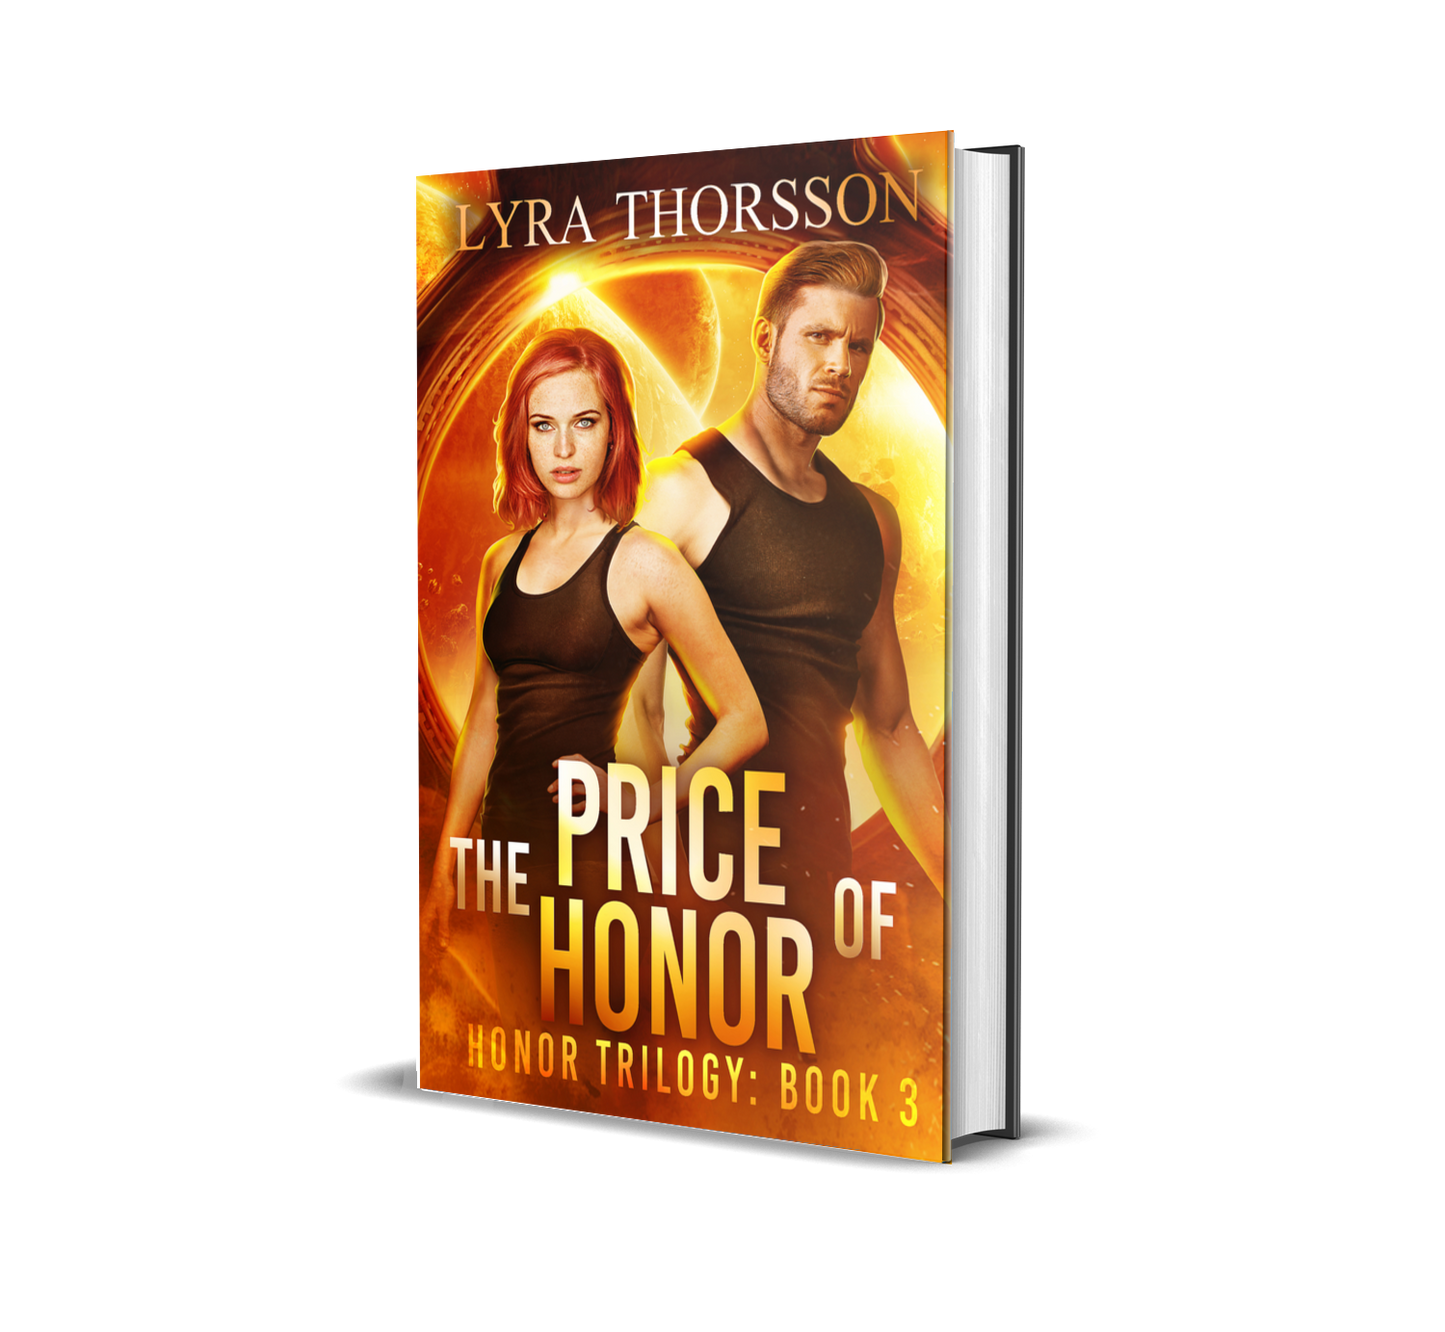 The Price of Honor (Honor Trilogy, Book 3) hardcover — SIGNED